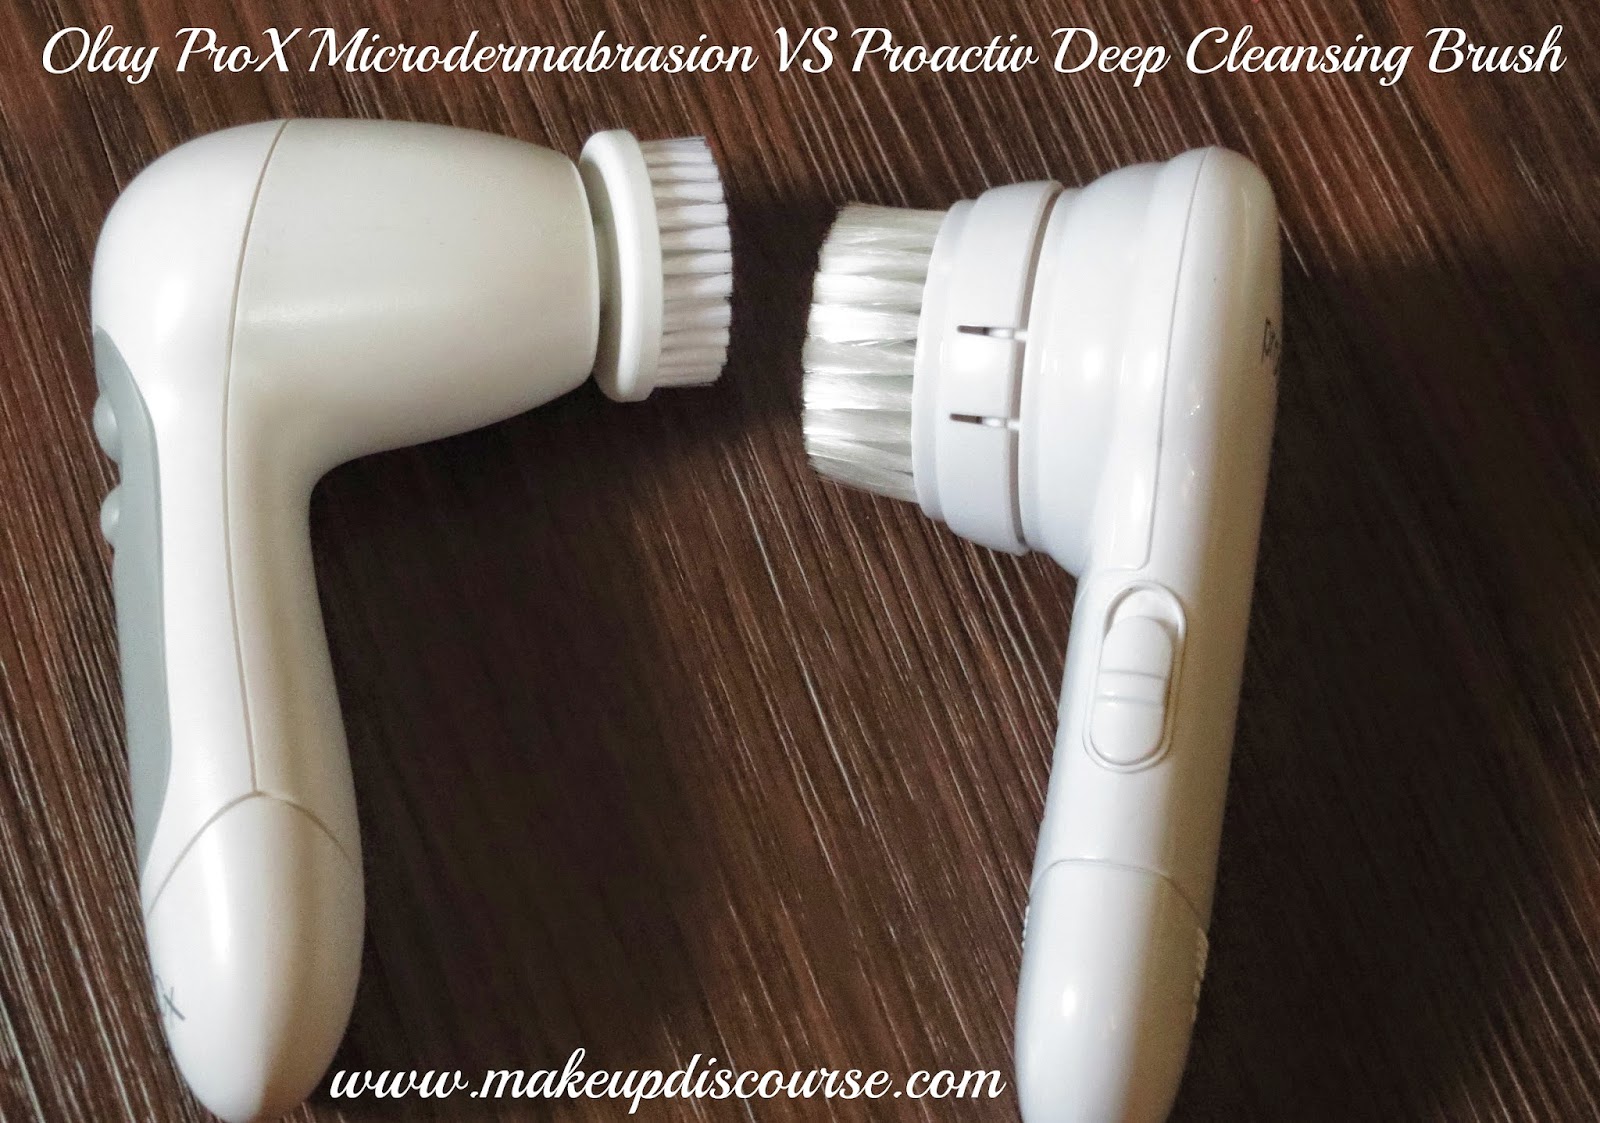 Olay Prox Microdermabrasion + Advanced Cleansing System VS Proactiv Deep Cleansing Brush in India Review